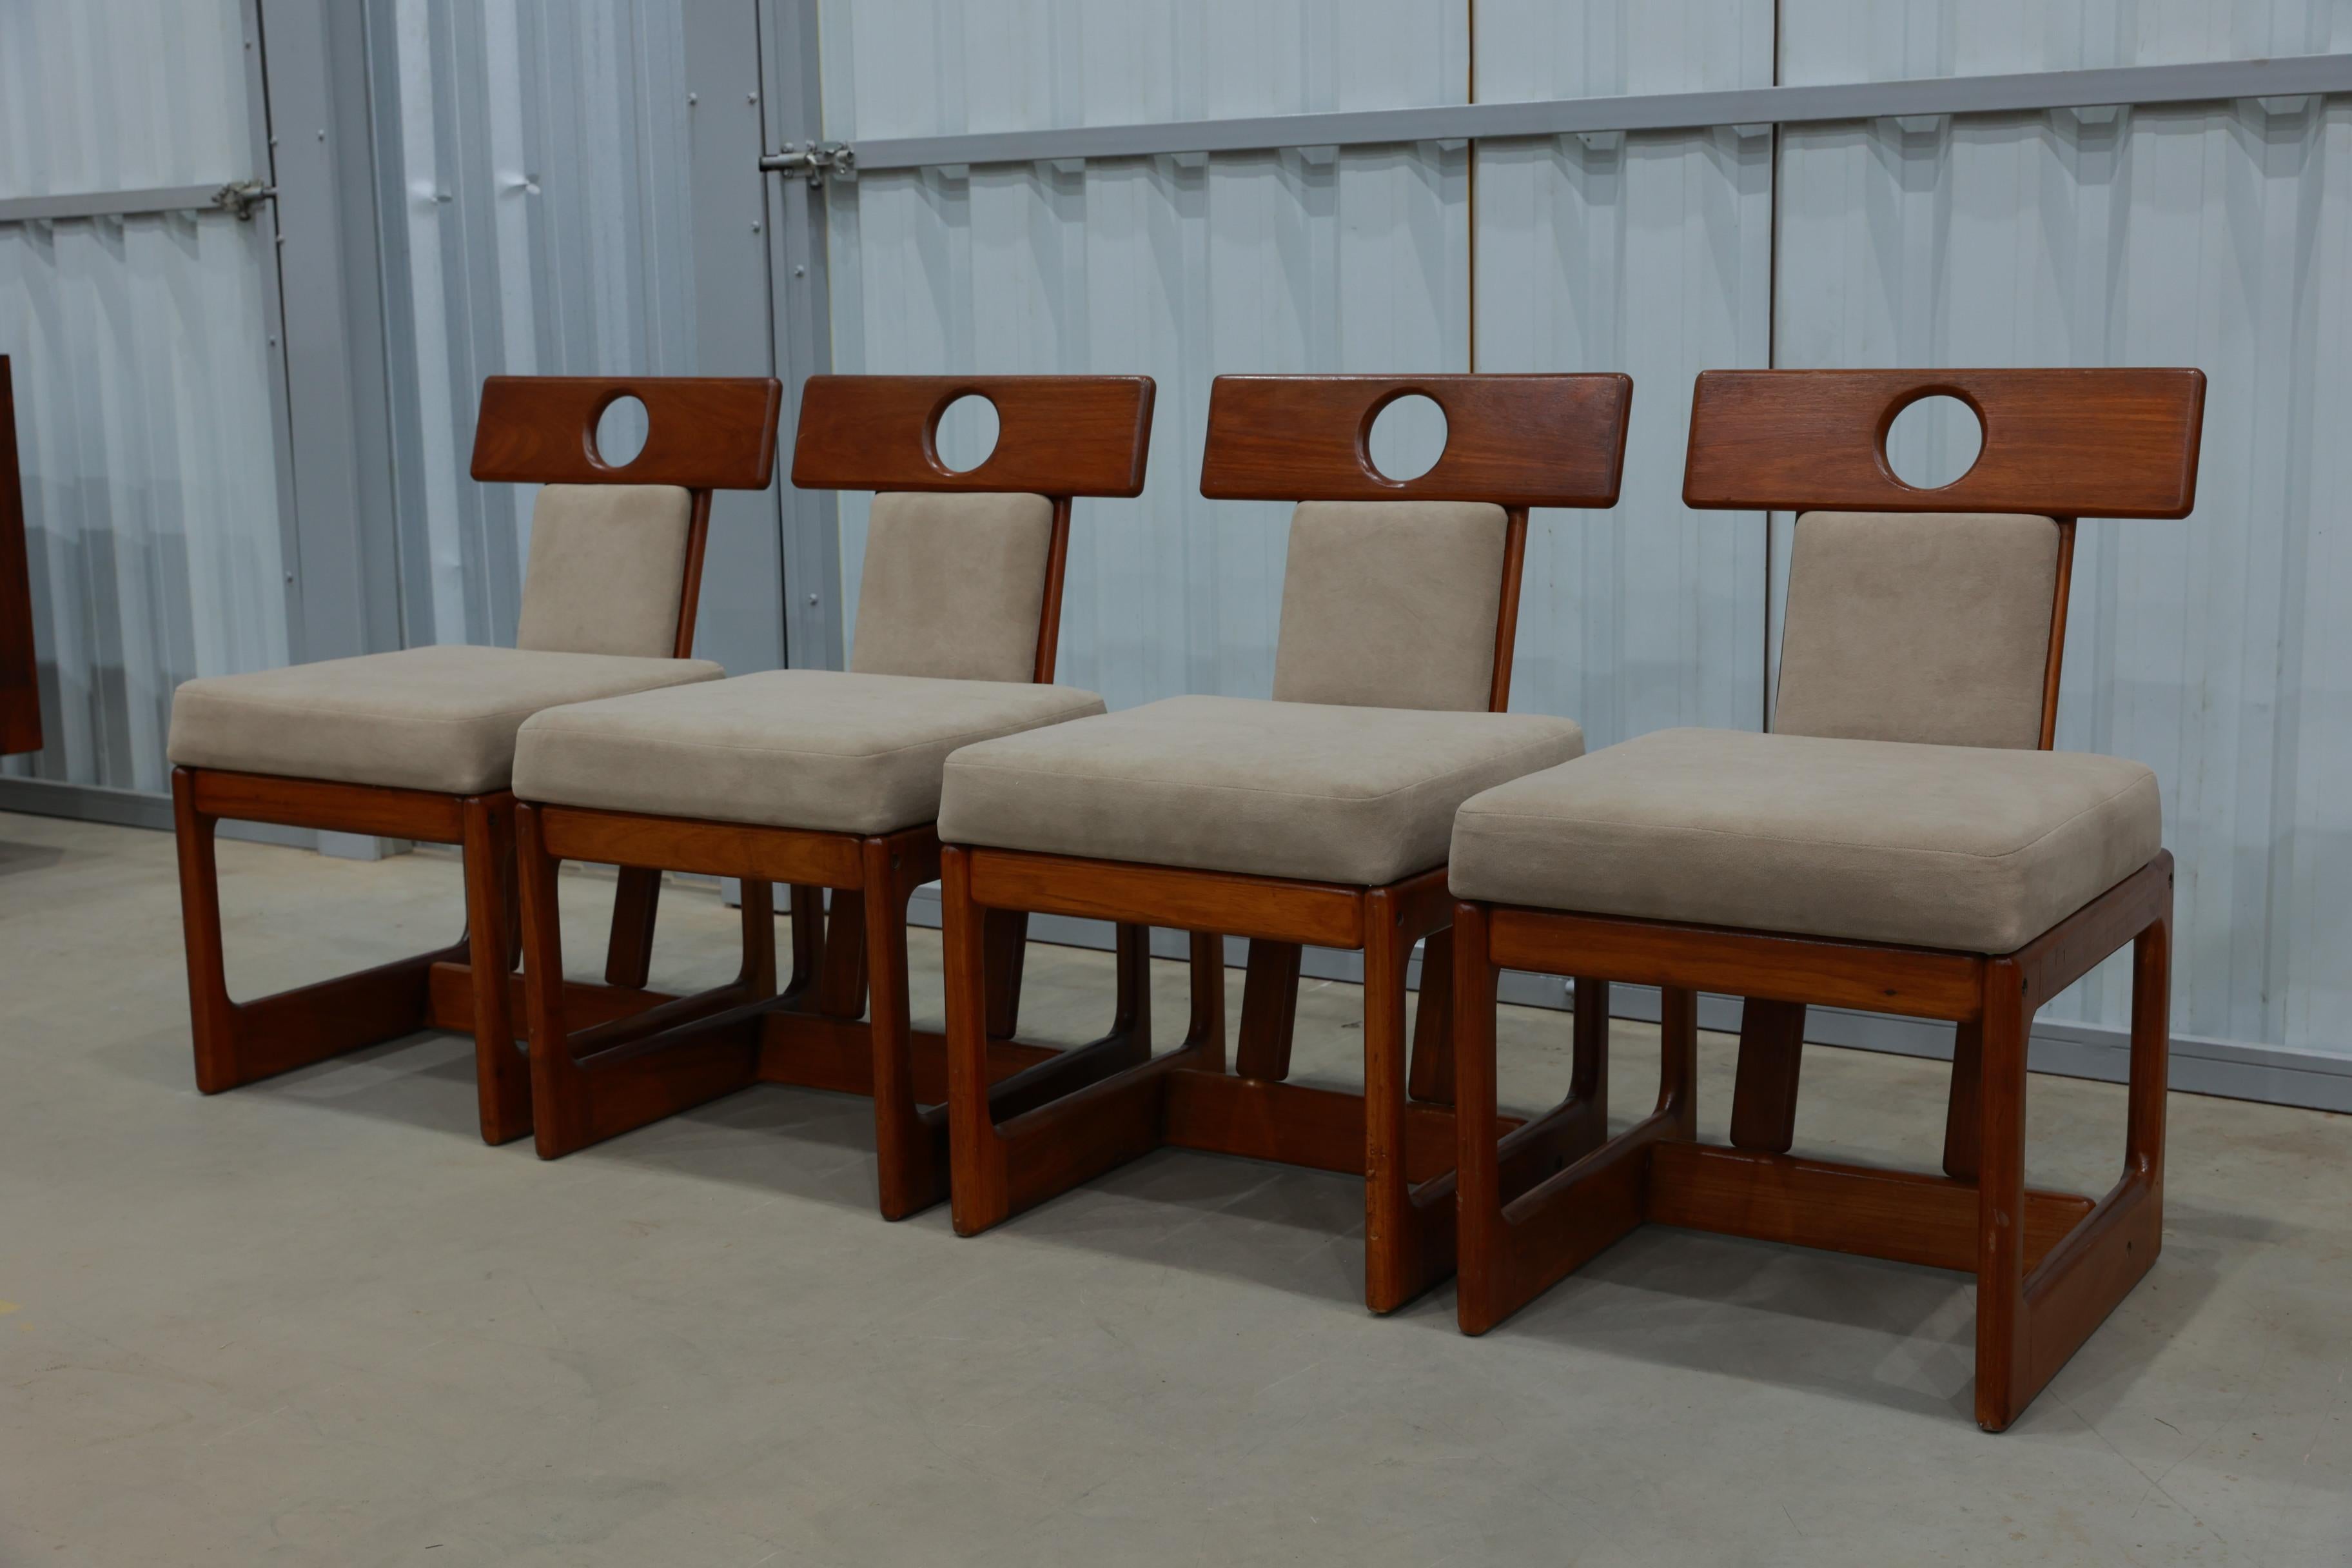 Available today in NYC with FREE DOMESTIC SHIPPING included, this
“Cuiaba” Set of of 4 Chairs in Hardwood and Fabric by Sergio Rodrigues, 1970’s is nothing less than the find of the year!

The chairs have been restored and are in excellent